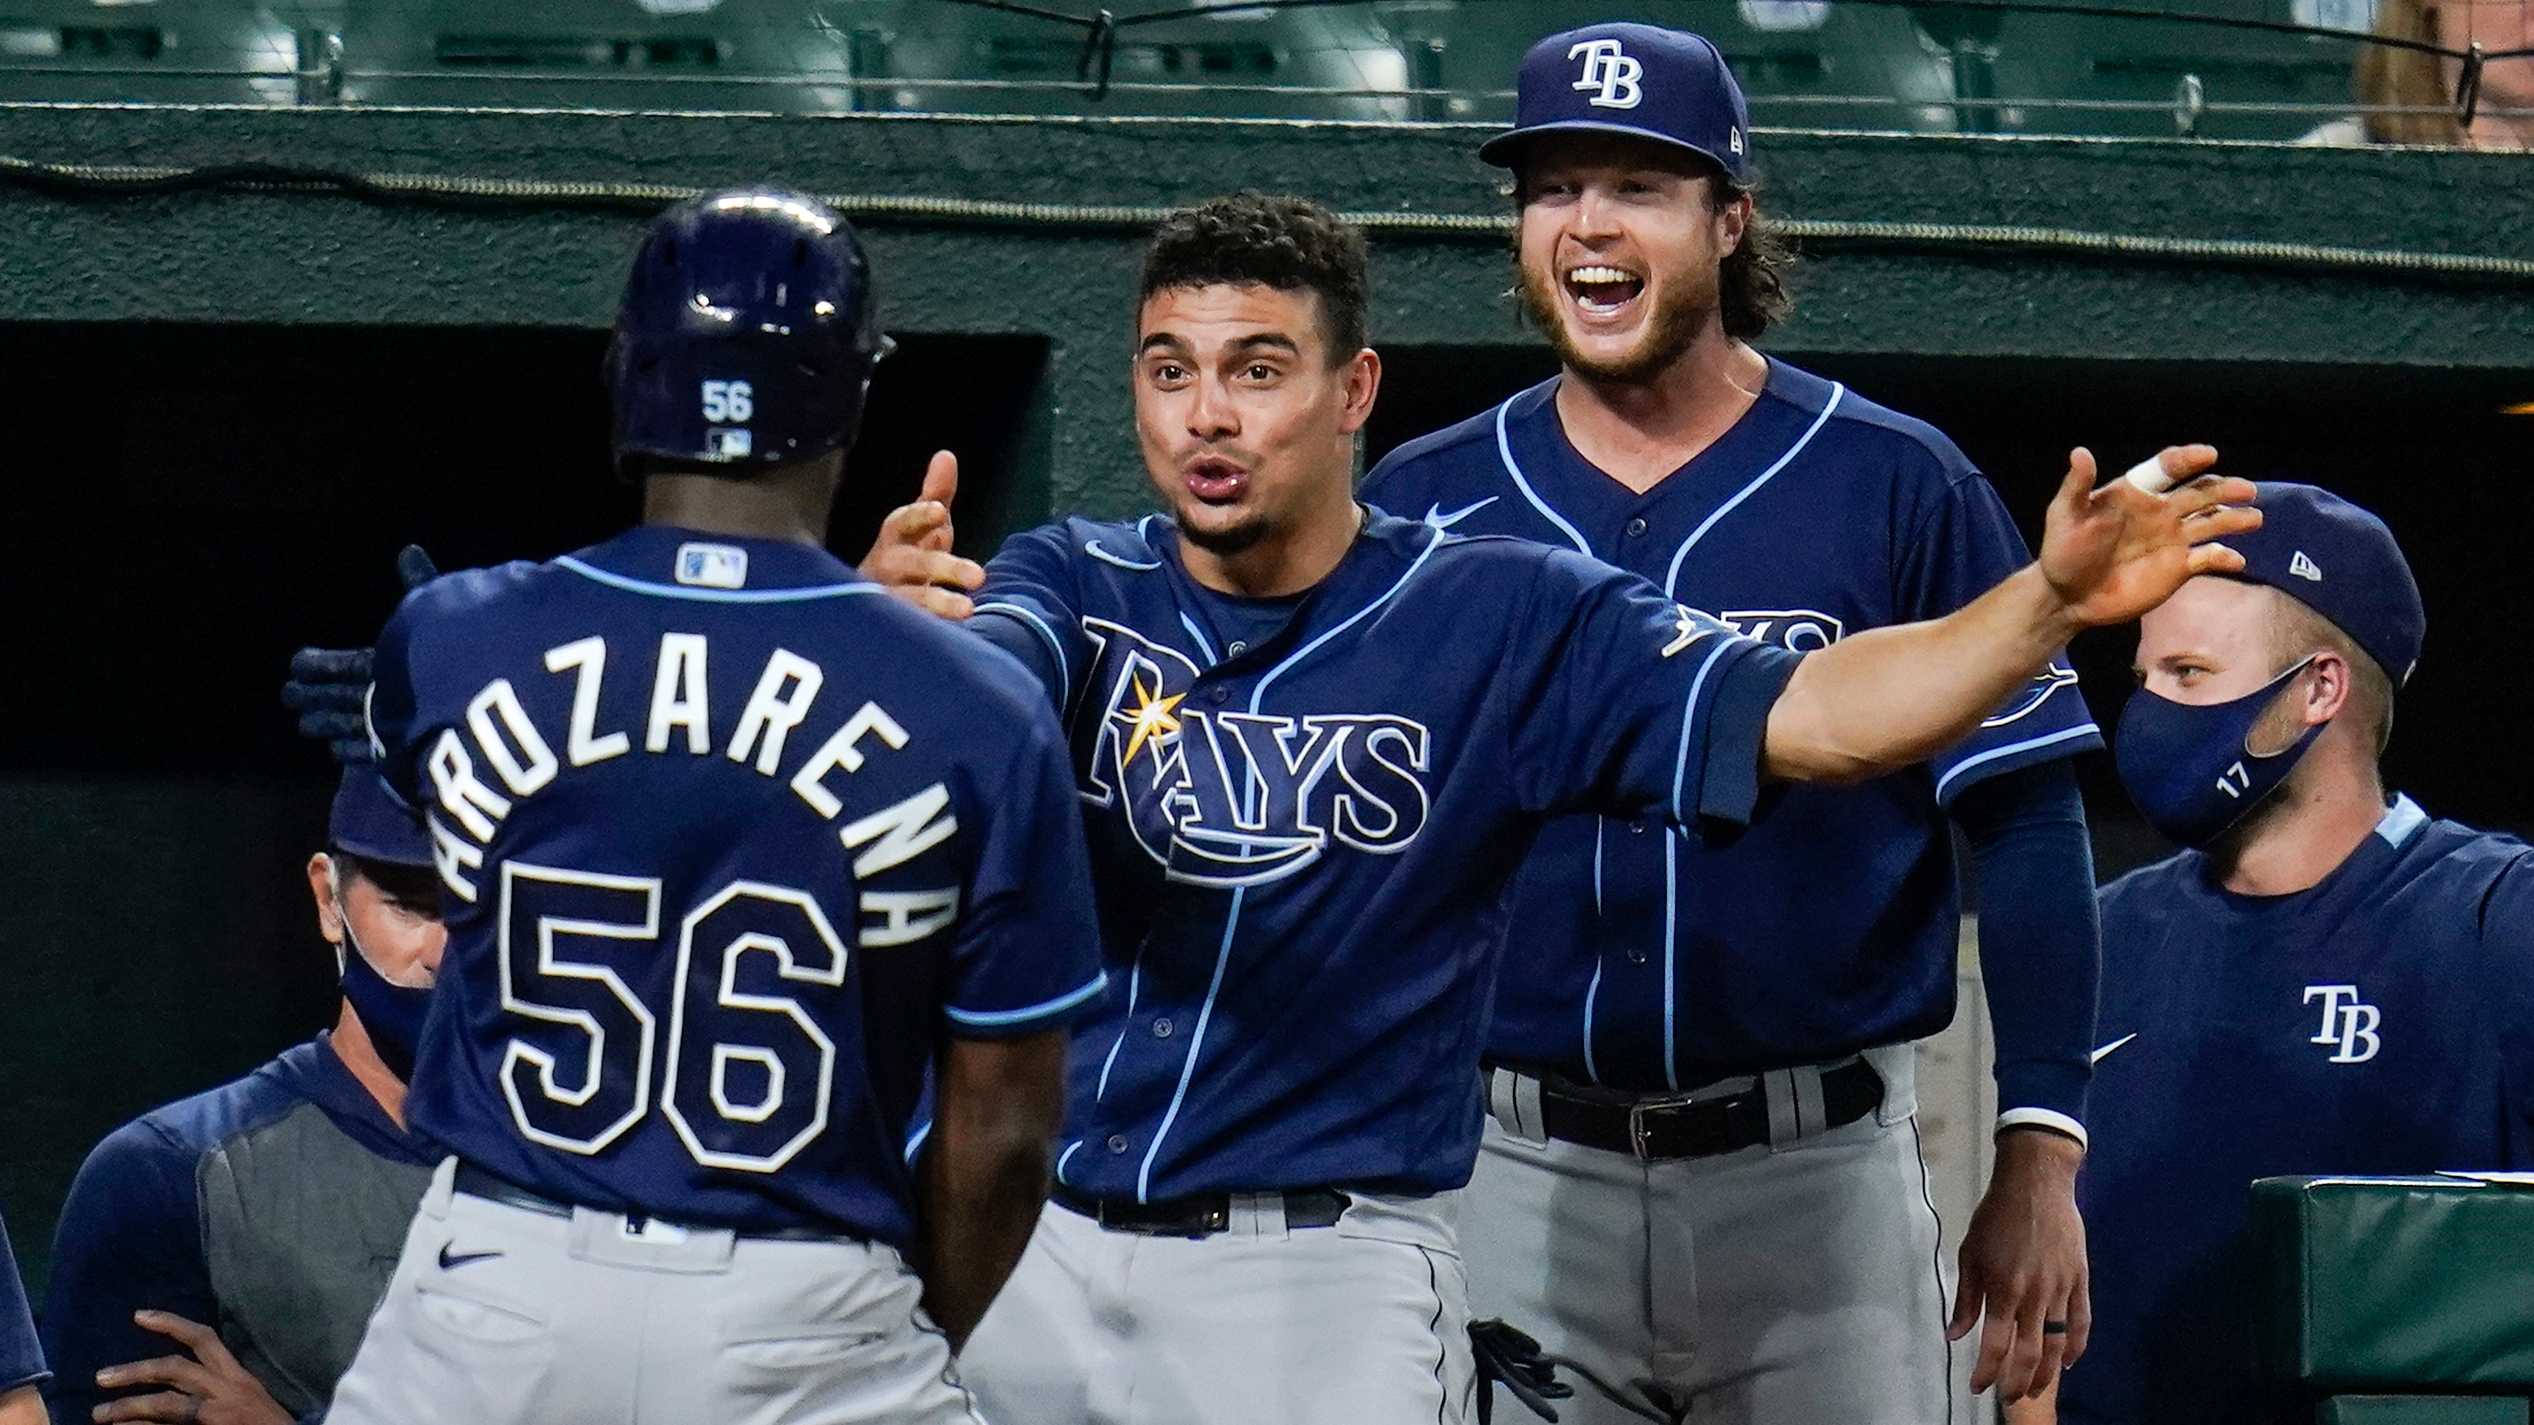 Rays come roaring back to beat Orioles, extend win streak to 6